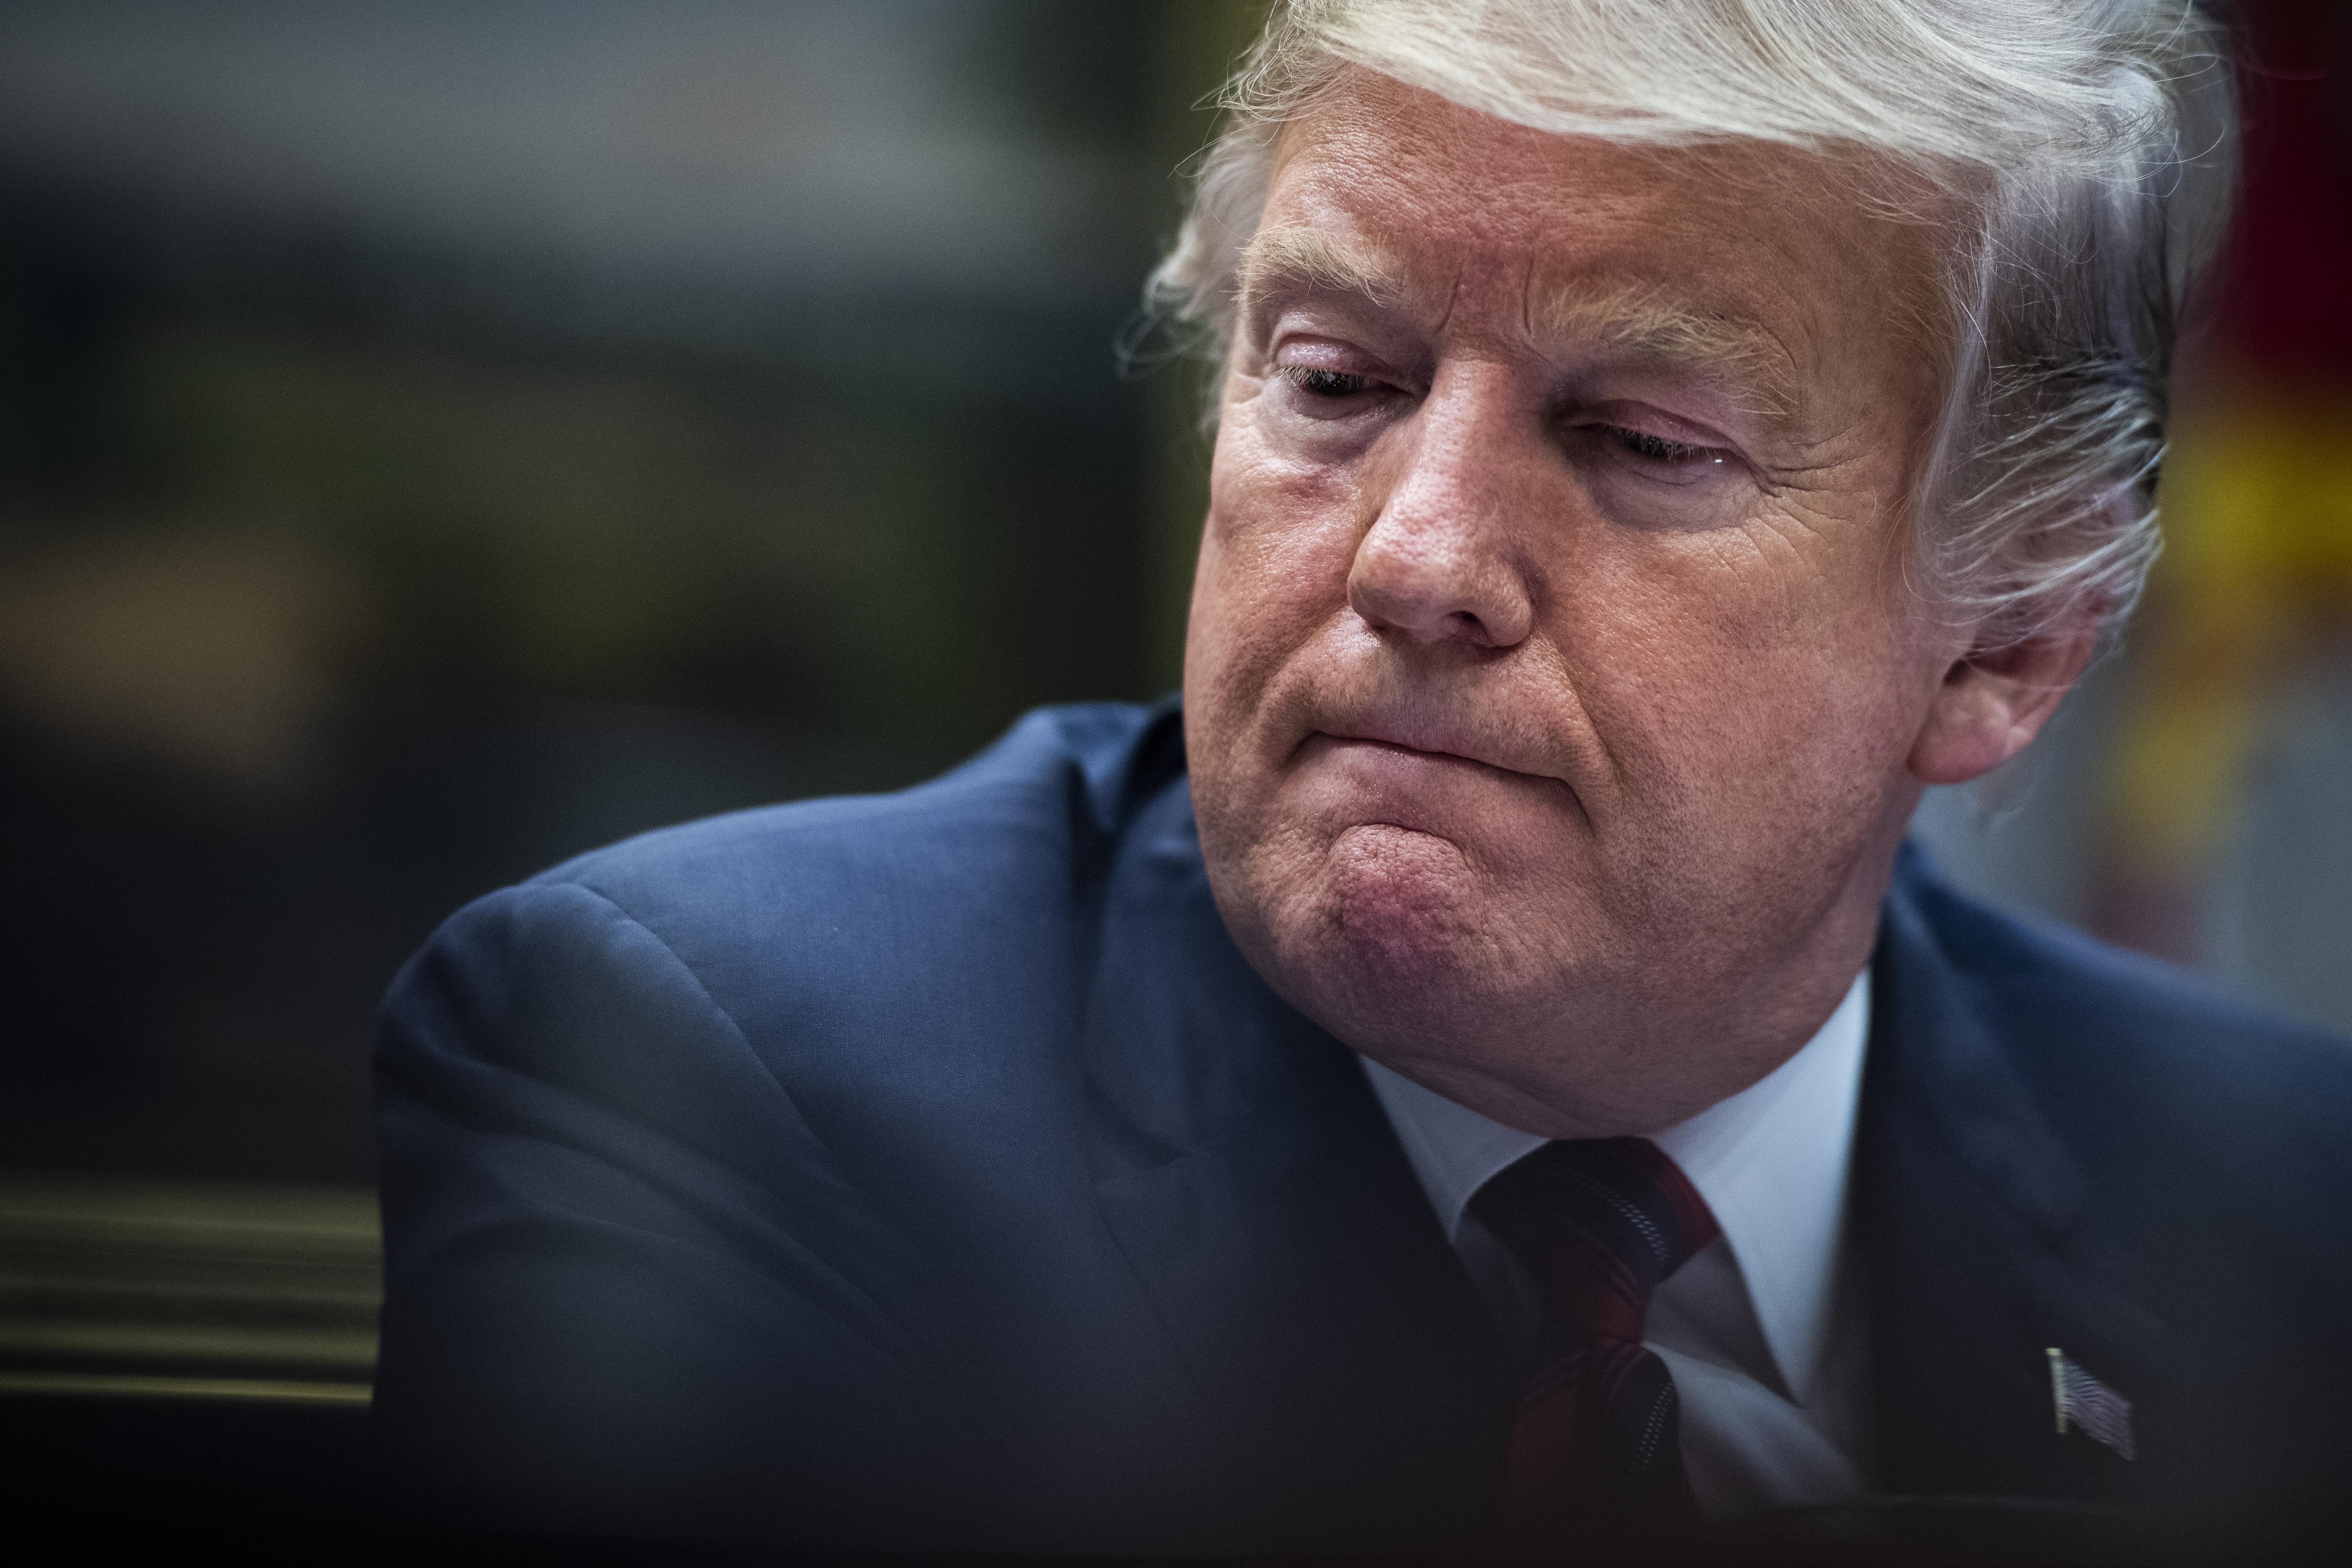 The long-awaited Mueller report could not firmly establish either collusion or obstruction of justice charges against President Donald Trump, but calls for his impeachment have not subsided. Photo: Washington Post